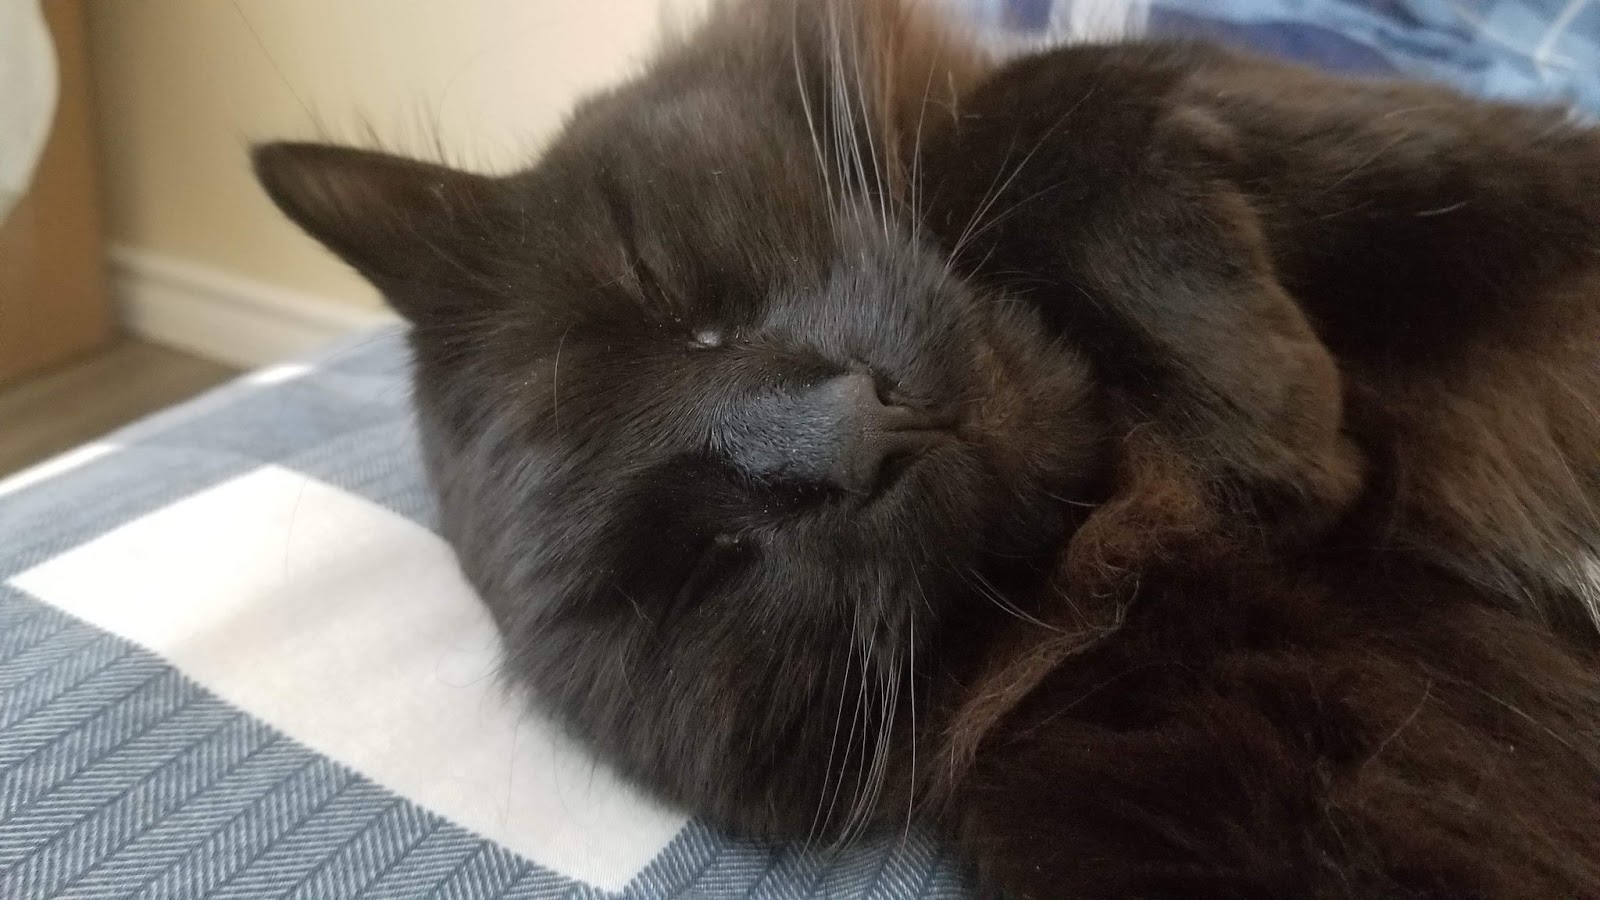 Look at this beautiful black cat taking a peaceful nap